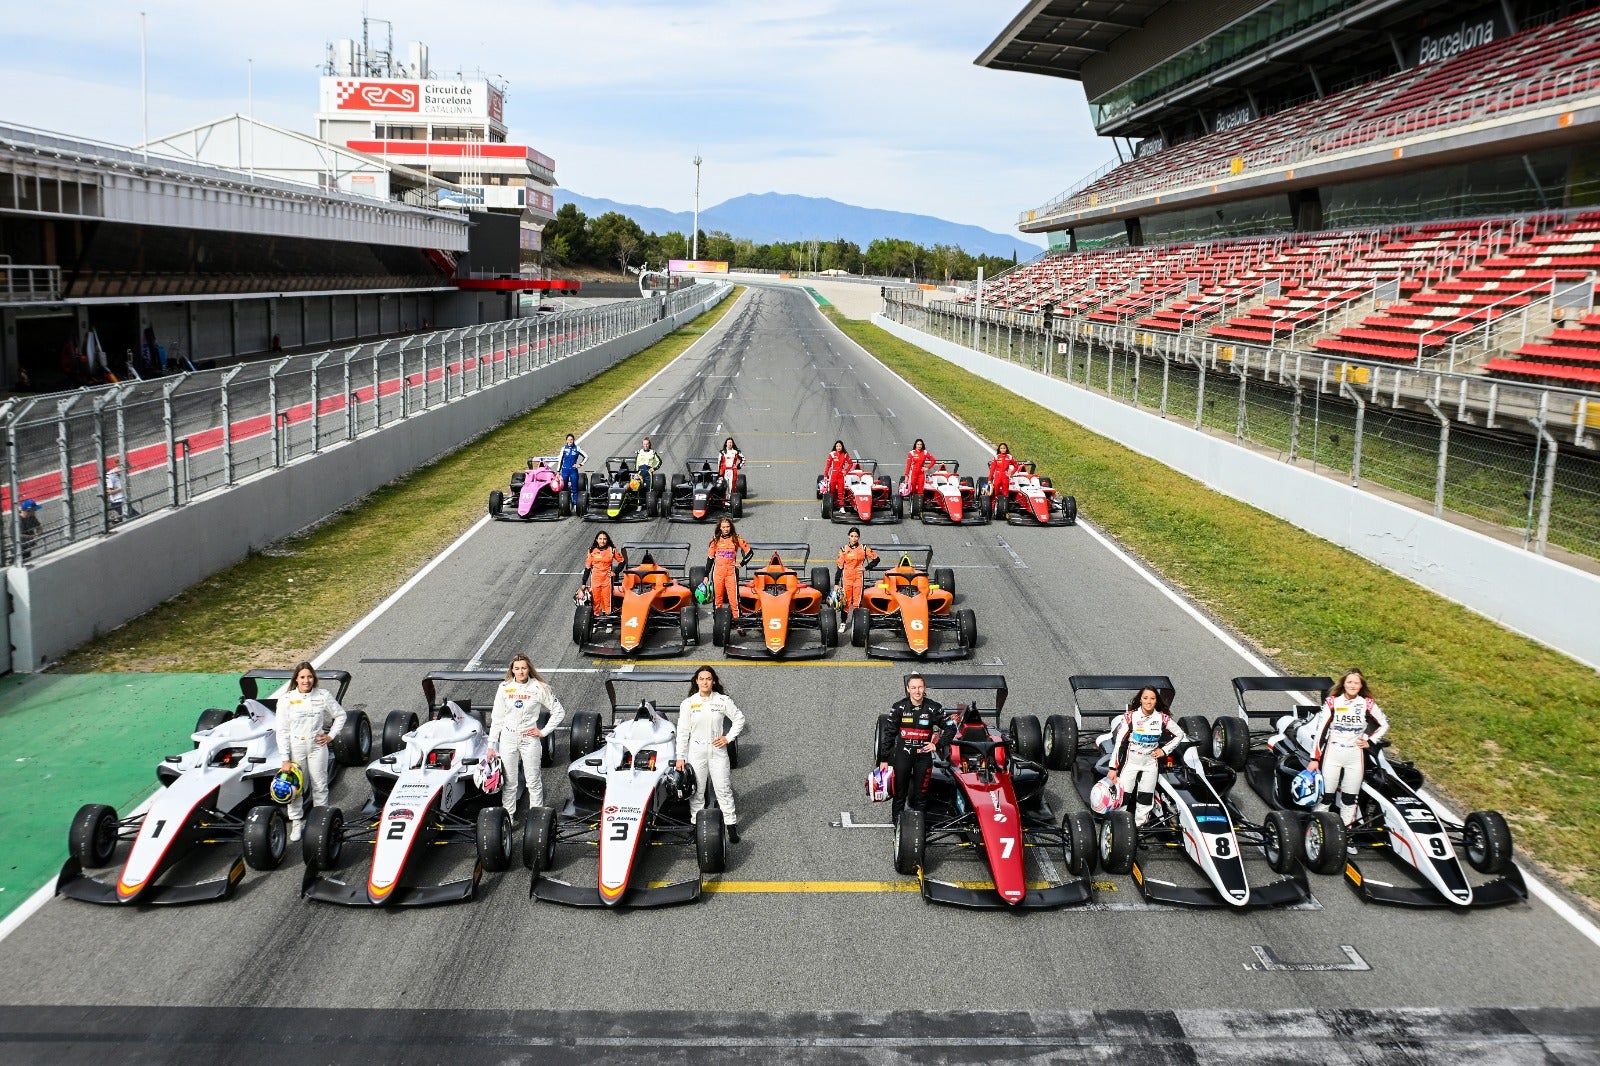 F1 Academy will have 15 drivers competing across 21 races this season